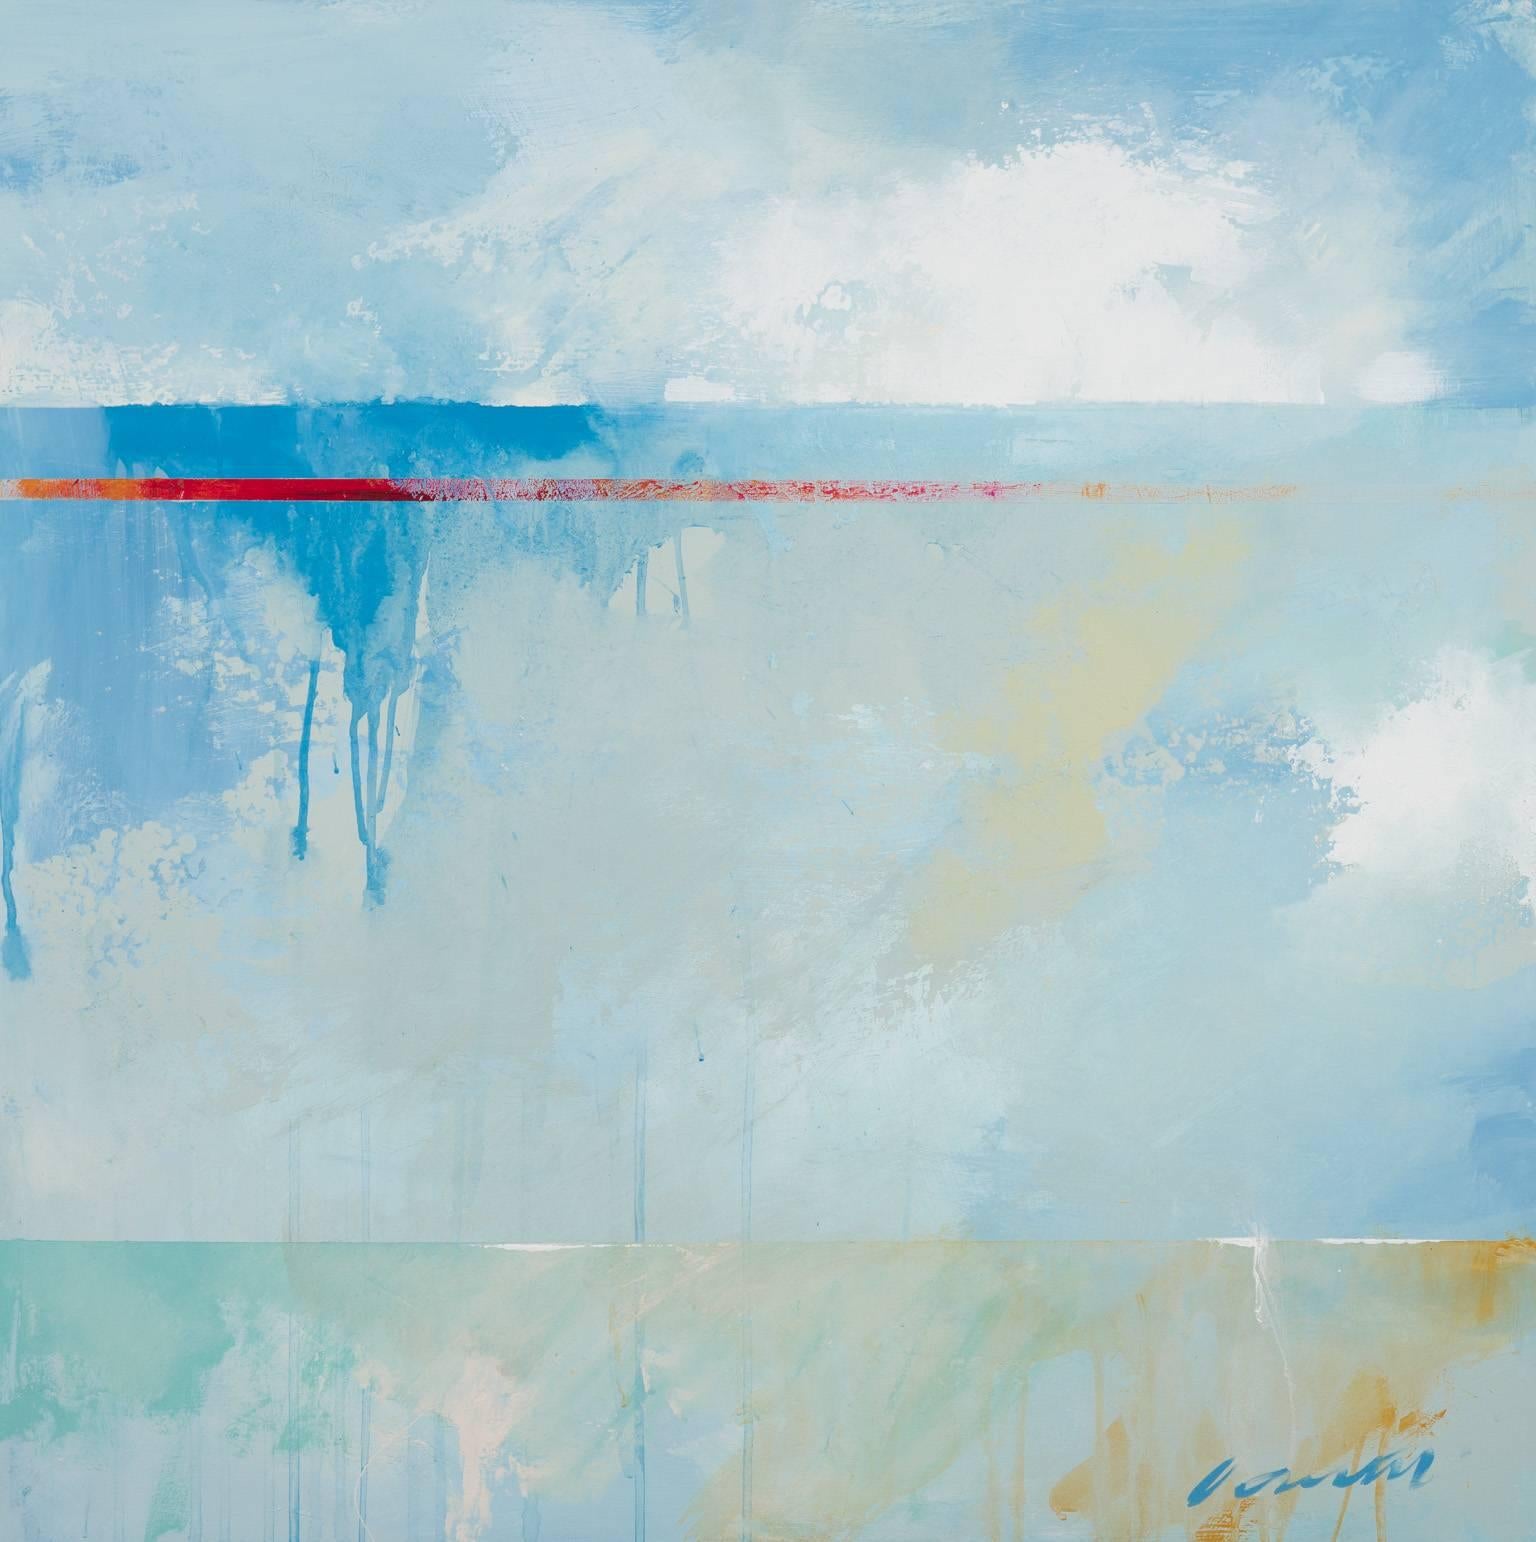 Cielo XXVII - Painting by Eric Abrecht